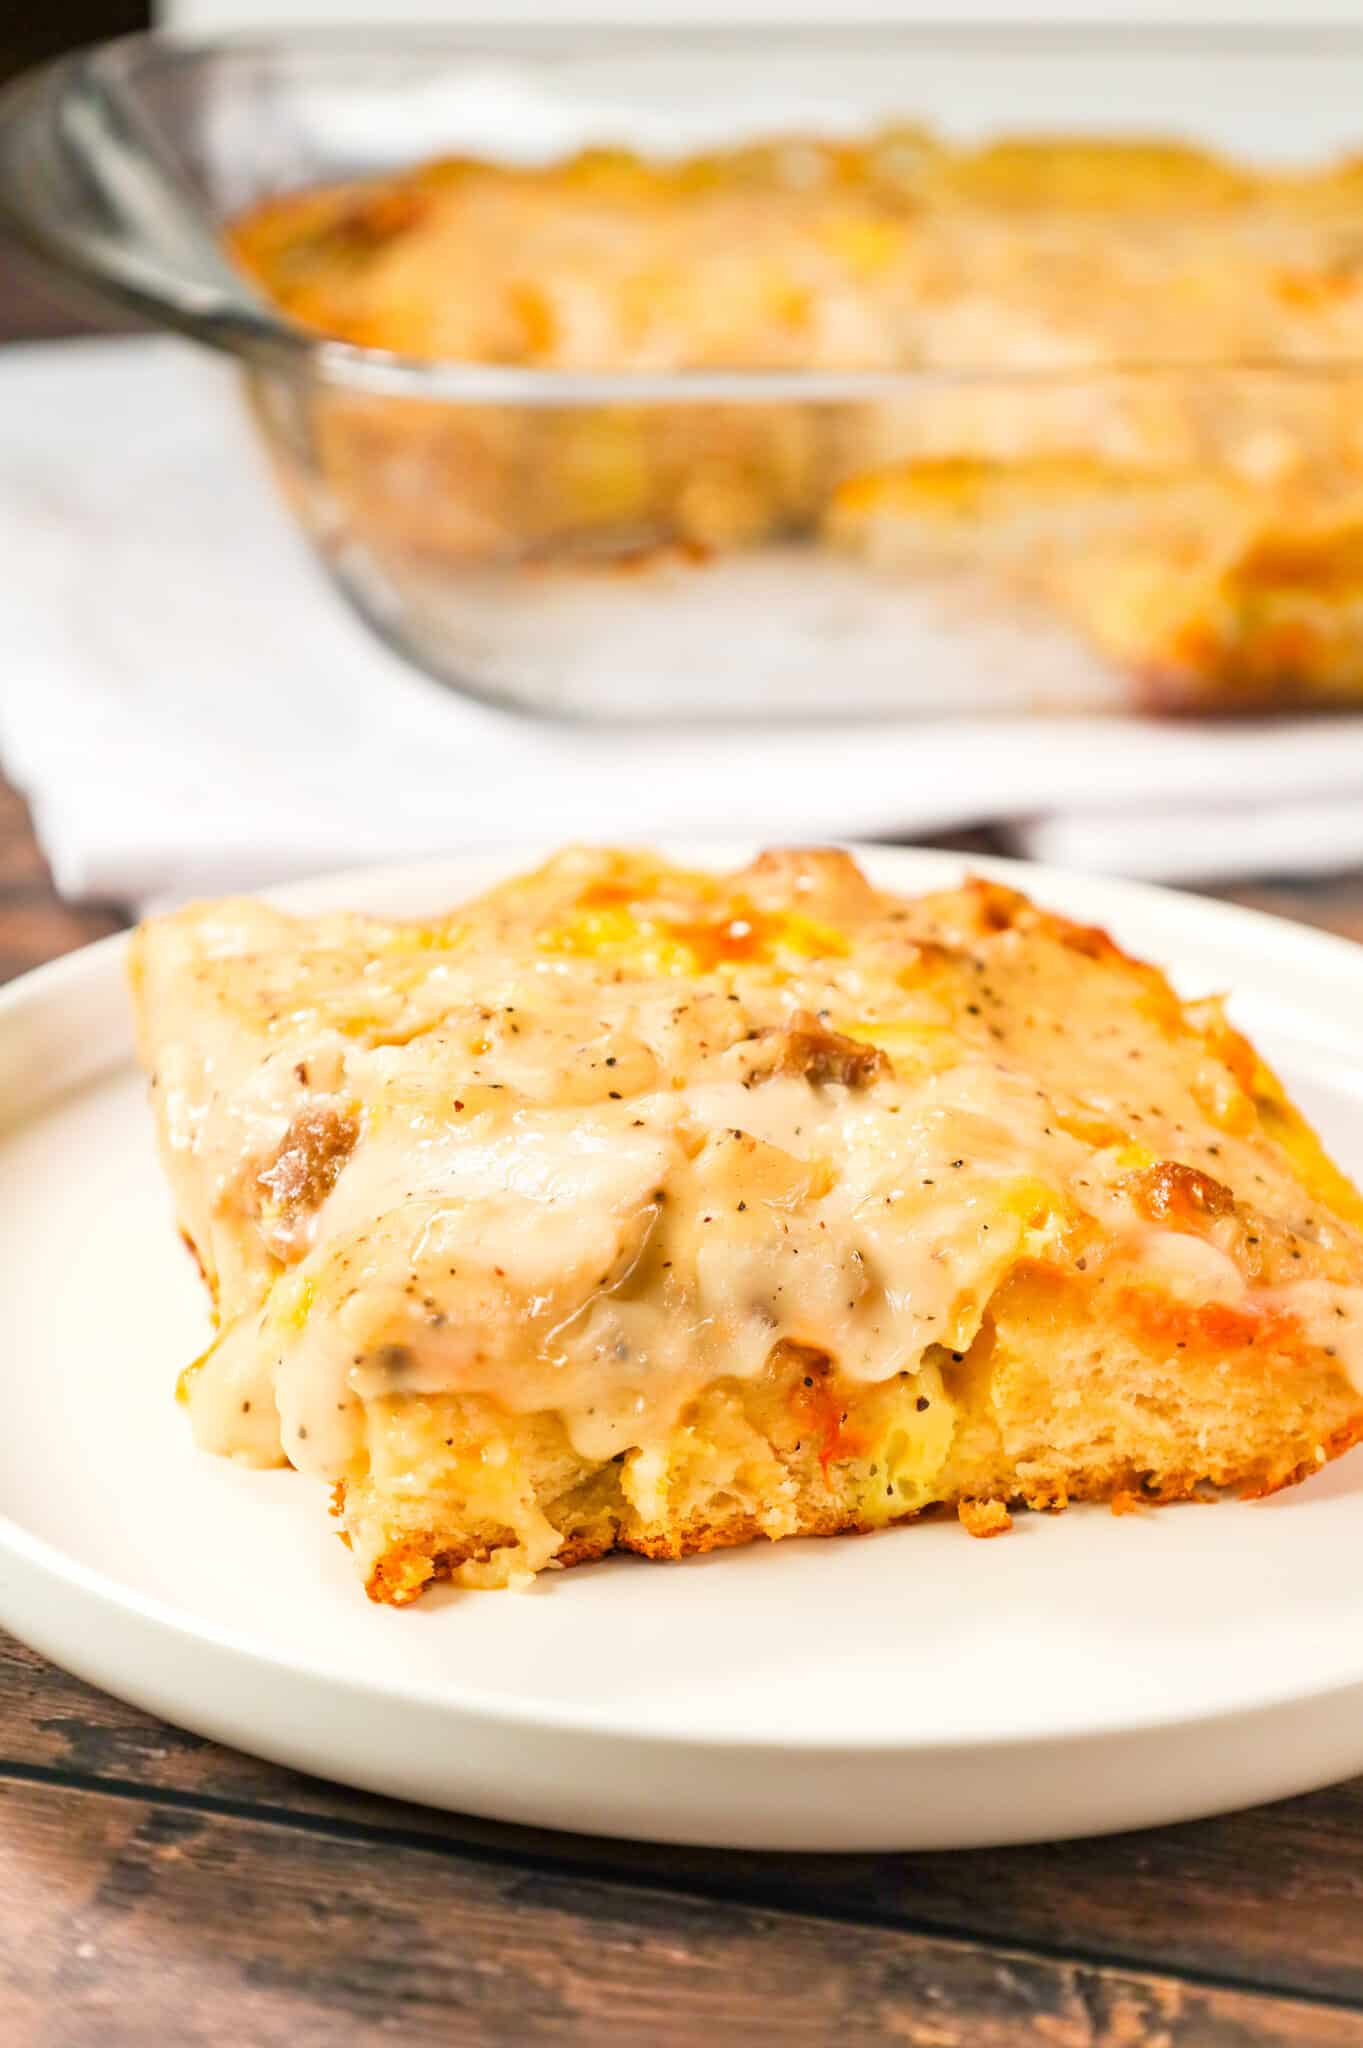 Biscuit and Gravy Casserole is a hearty breakfast dish made with Pillsbury biscuits and loaded with crumbled sausage, cheddar cheese and peppered gravy.